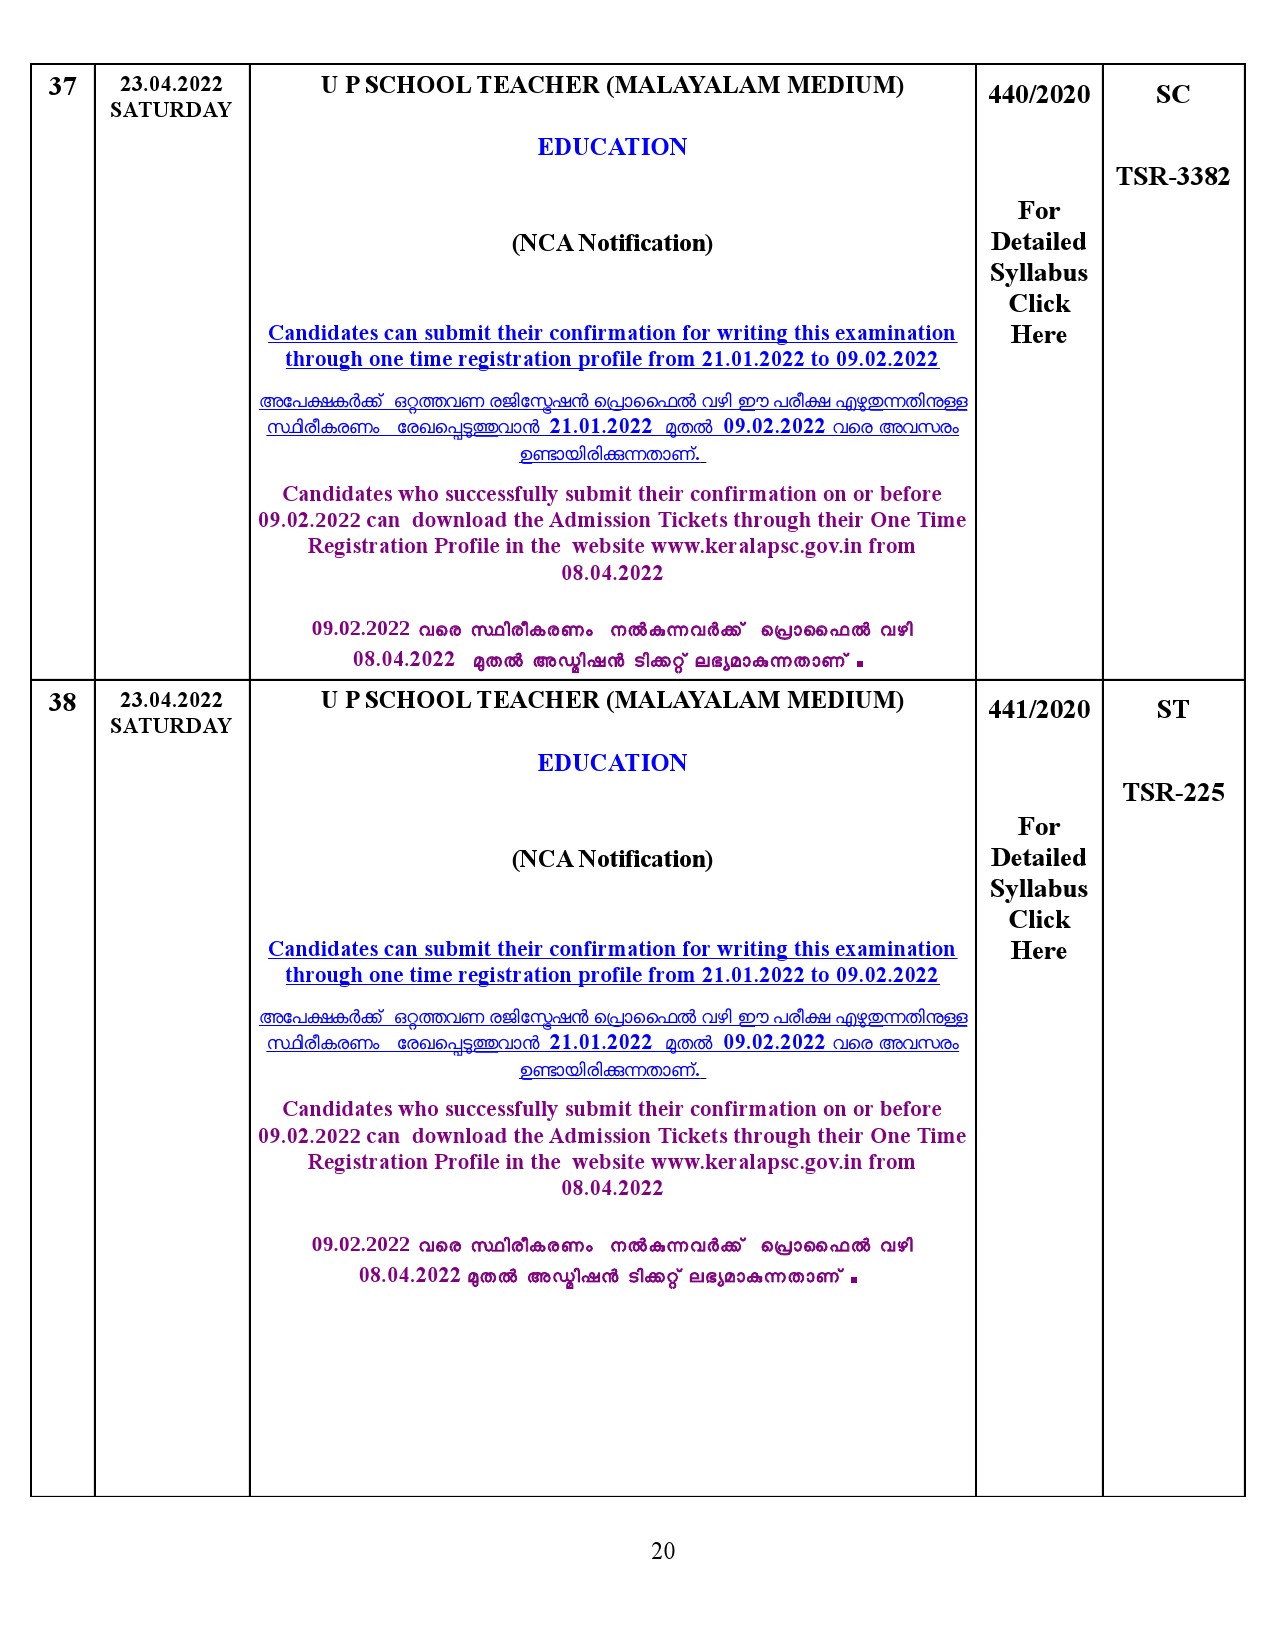 Examination Programme For The Month Of April 2022 - Notification Image 20